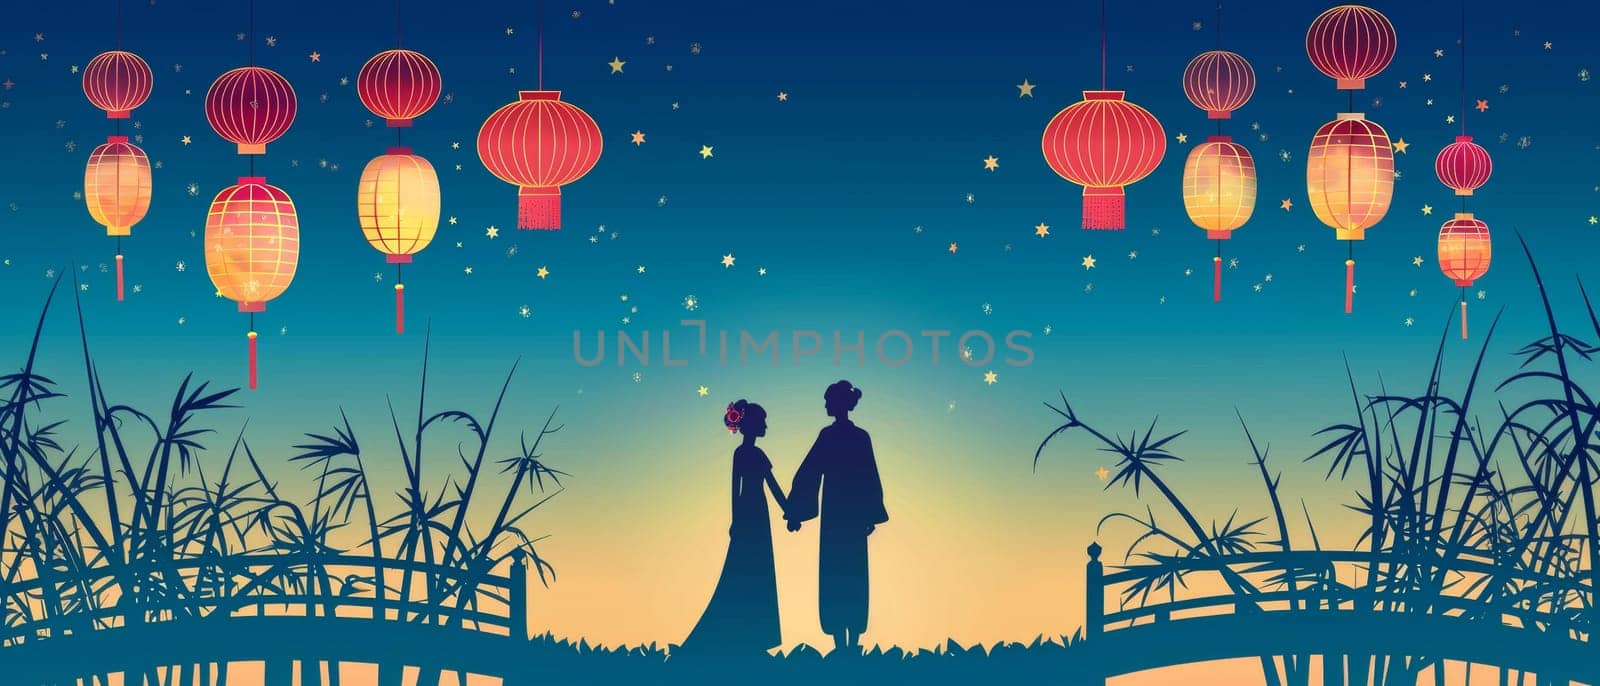 A couples silhouette stands under a starry sky adorned with vibrant paper lanterns, creating an enchanting and romantic atmosphere